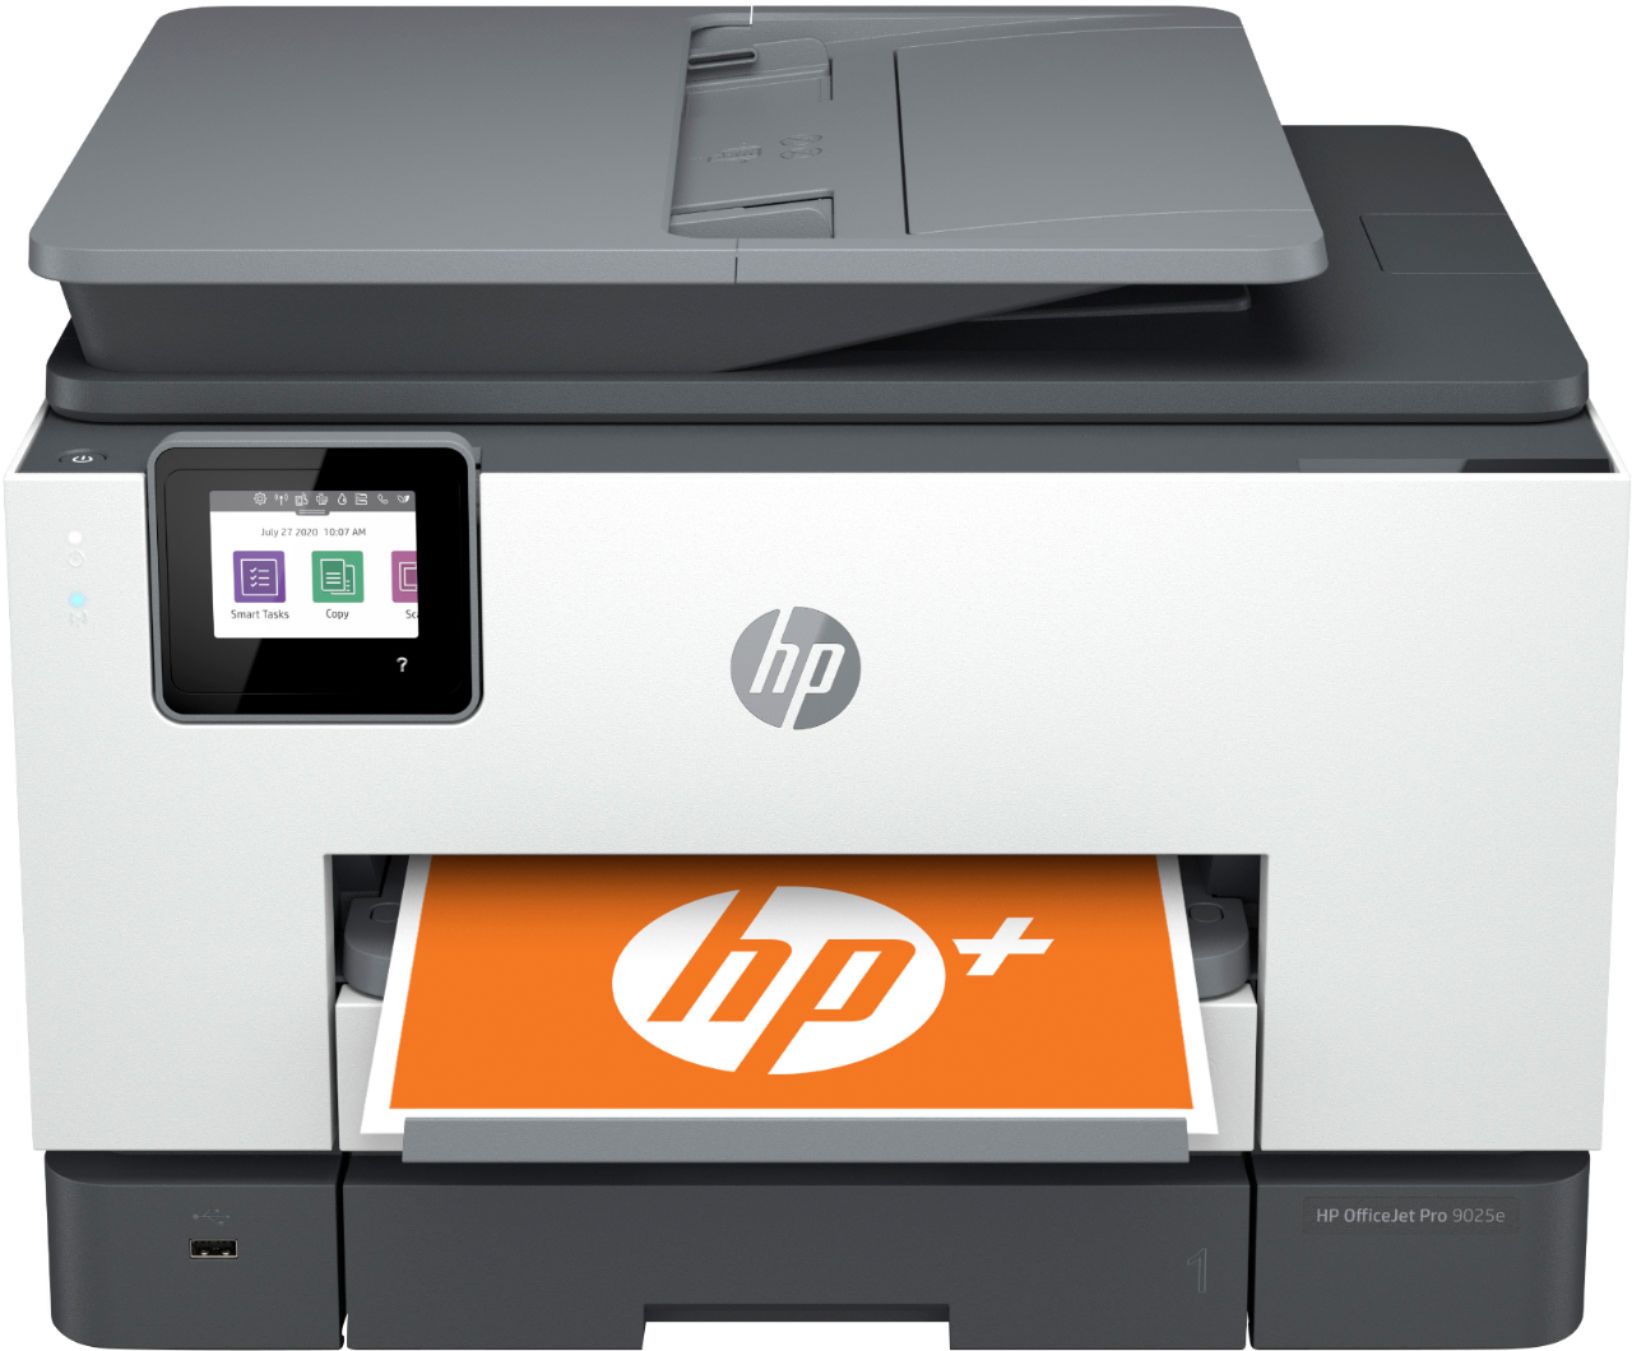 HP OfficeJet Pro 7740 Photocopy Issue : r/printers